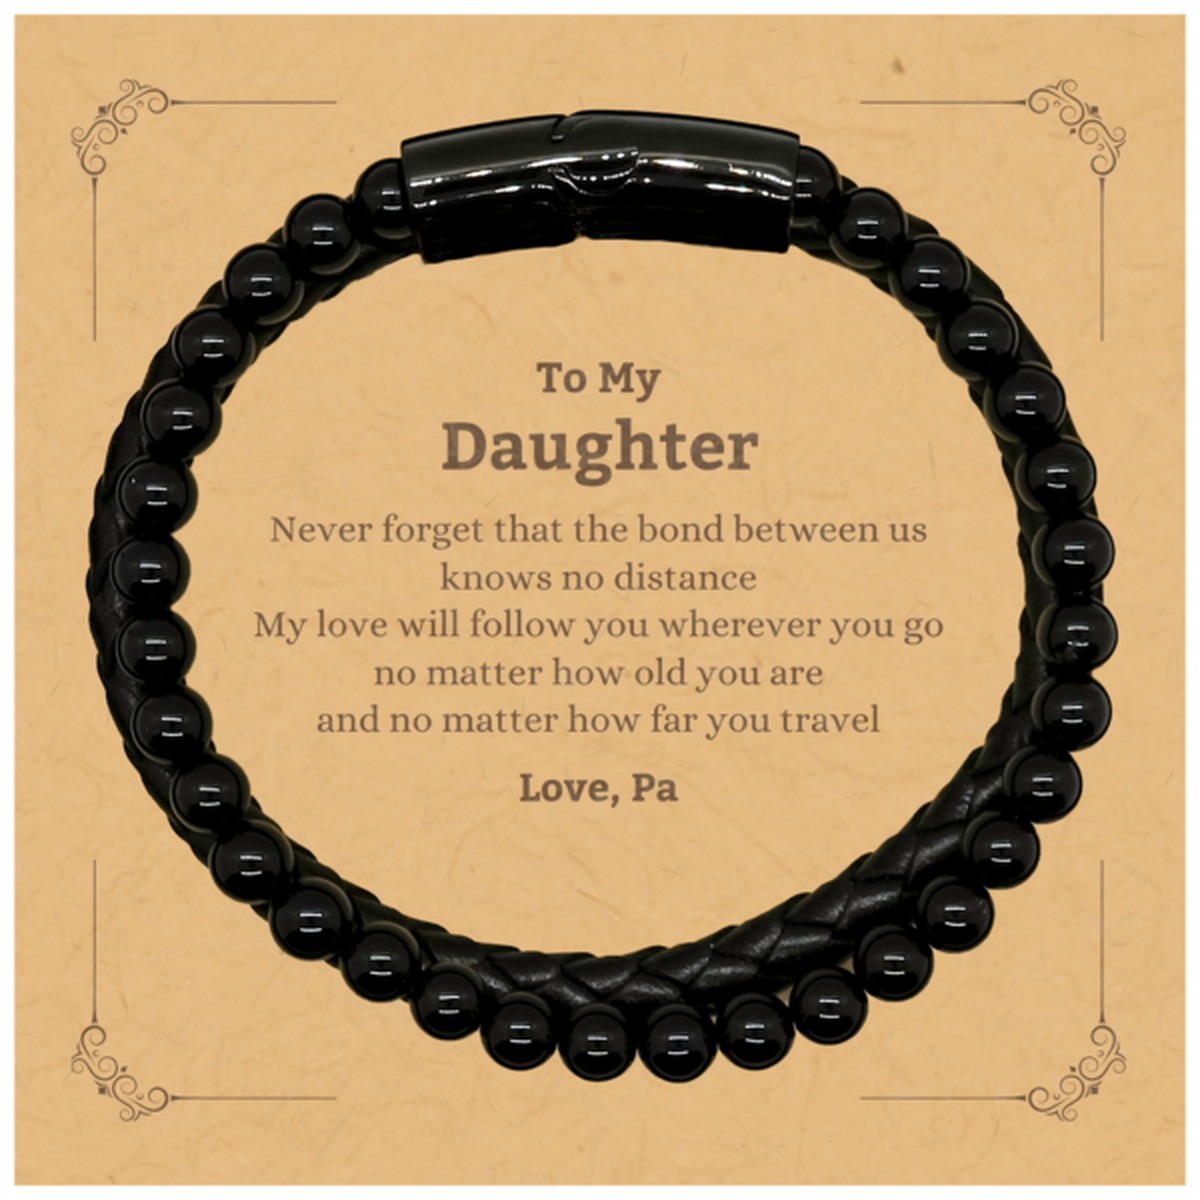 Daughter Birthday Gifts from Pa, Adjustable Stone Leather Bracelets for Daughter Christmas Graduation Unique Gifts Daughter Never forget that the bond between us knows no distance. Love, Pa